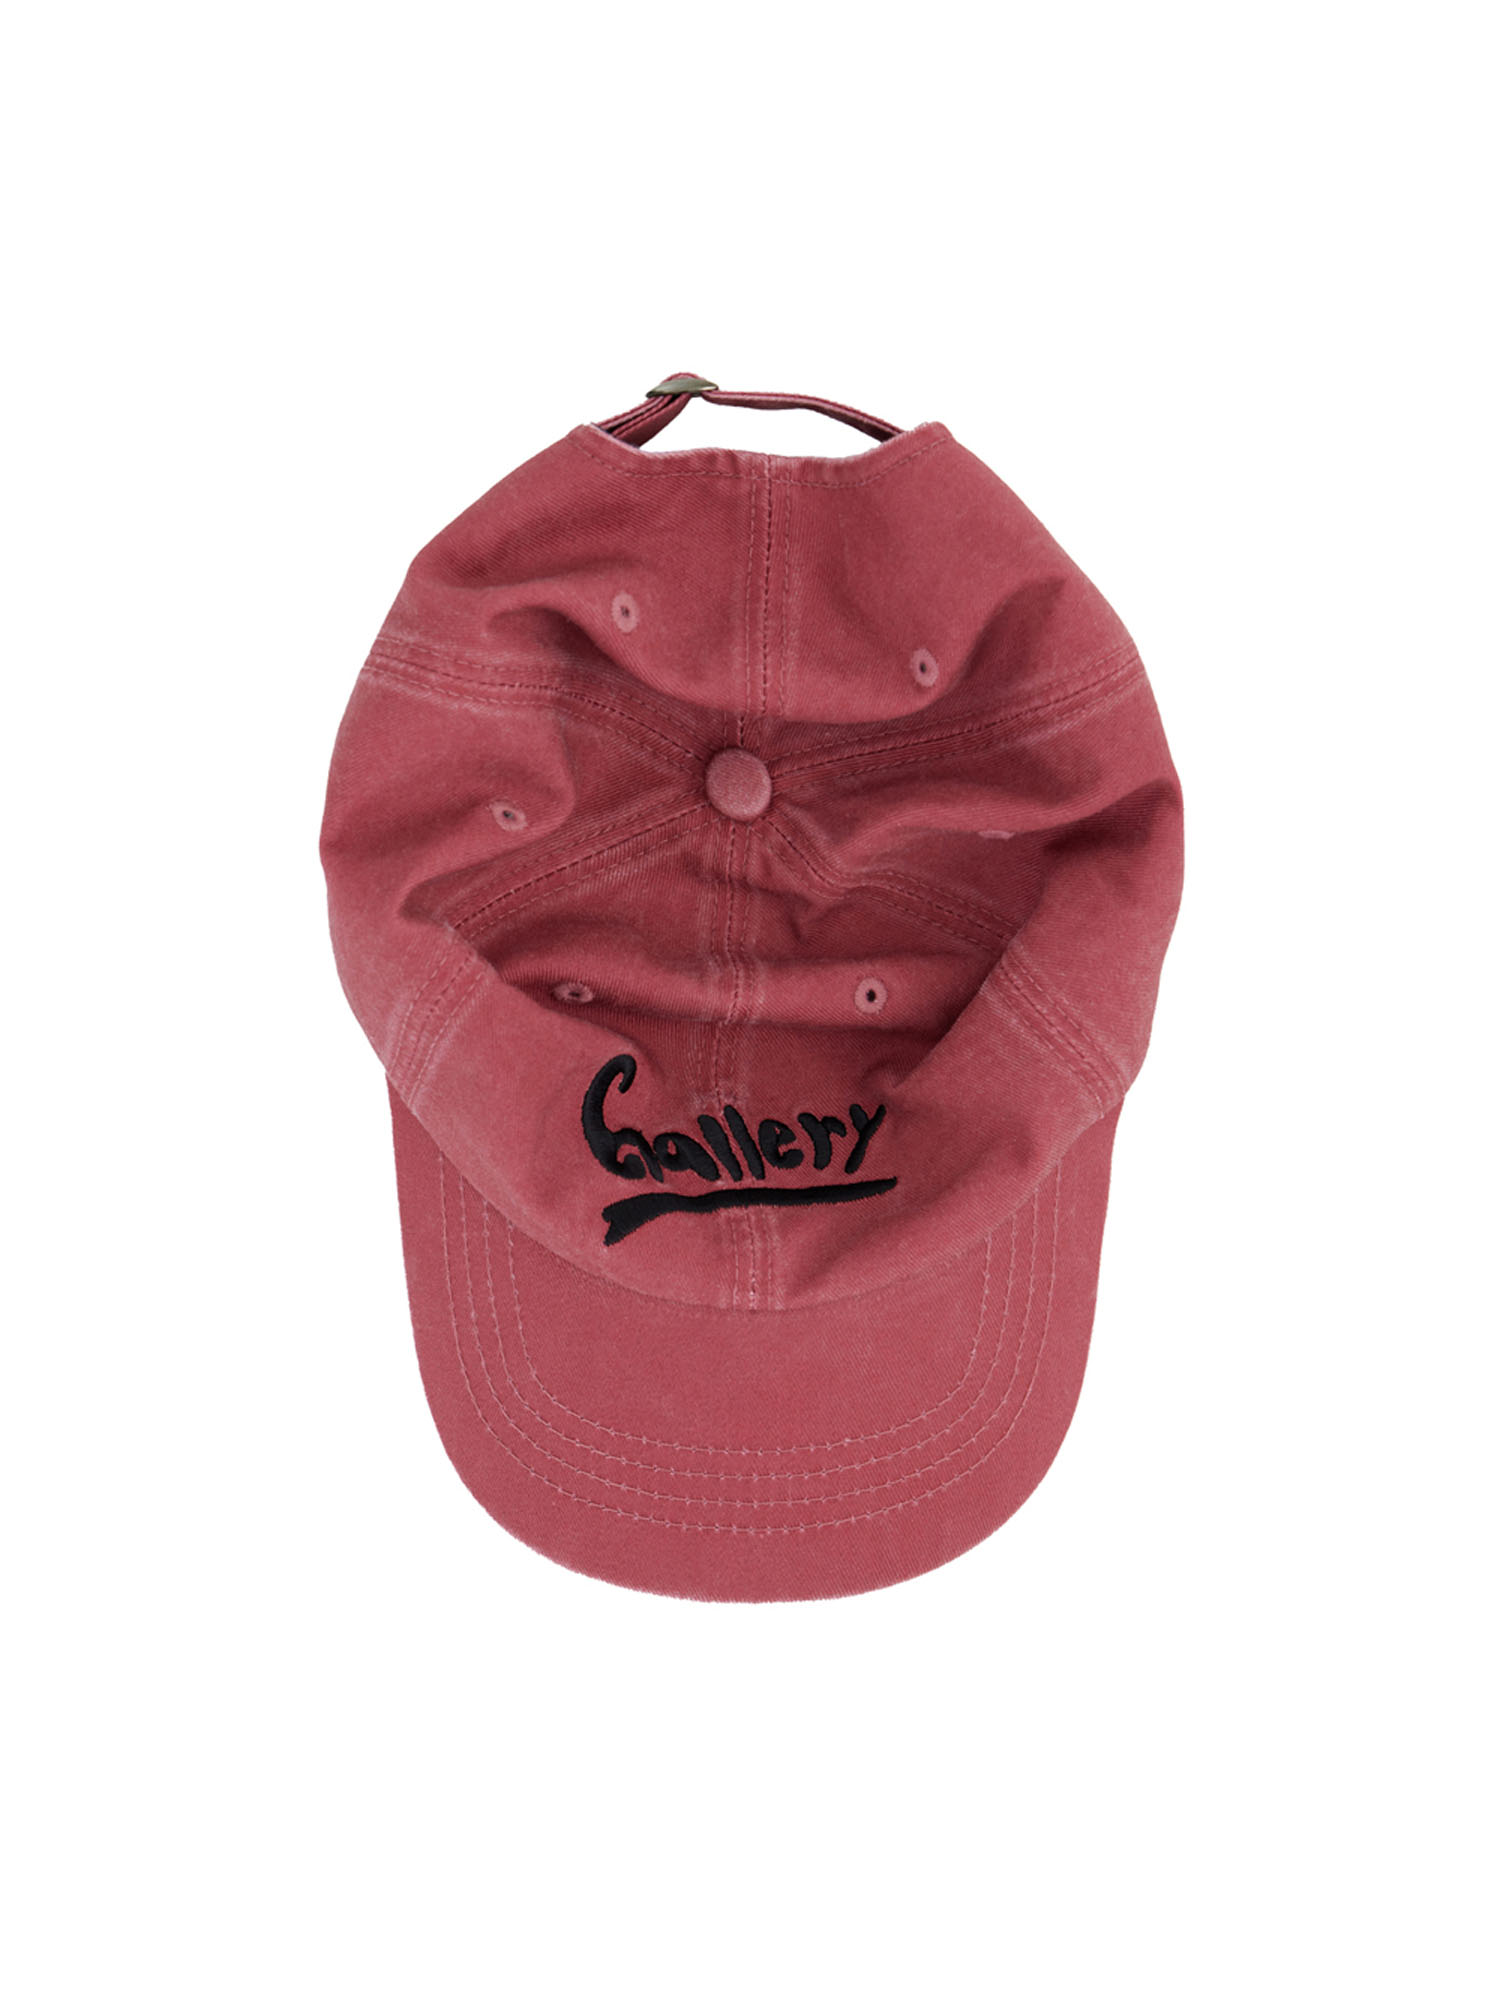 Gallery Ball Cap - Washed Pink